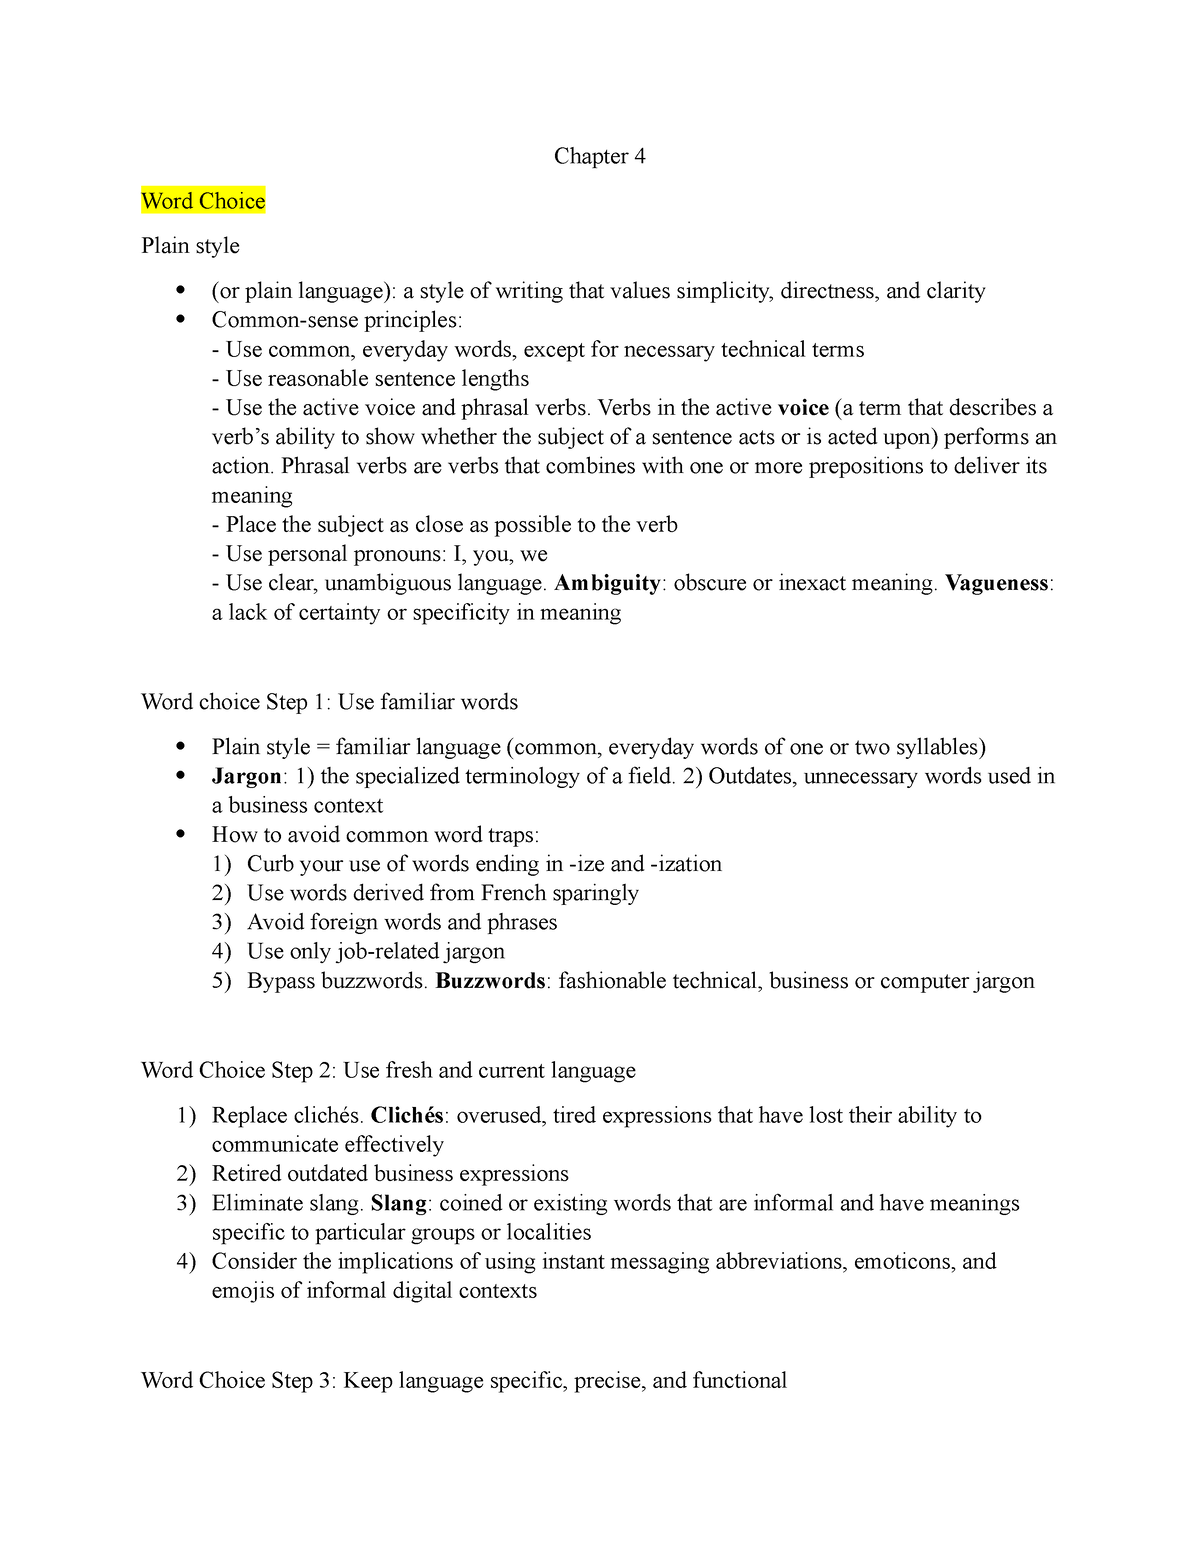 comm-205-chapter-4-notes-chapter-4-word-choice-plain-style-or-plain